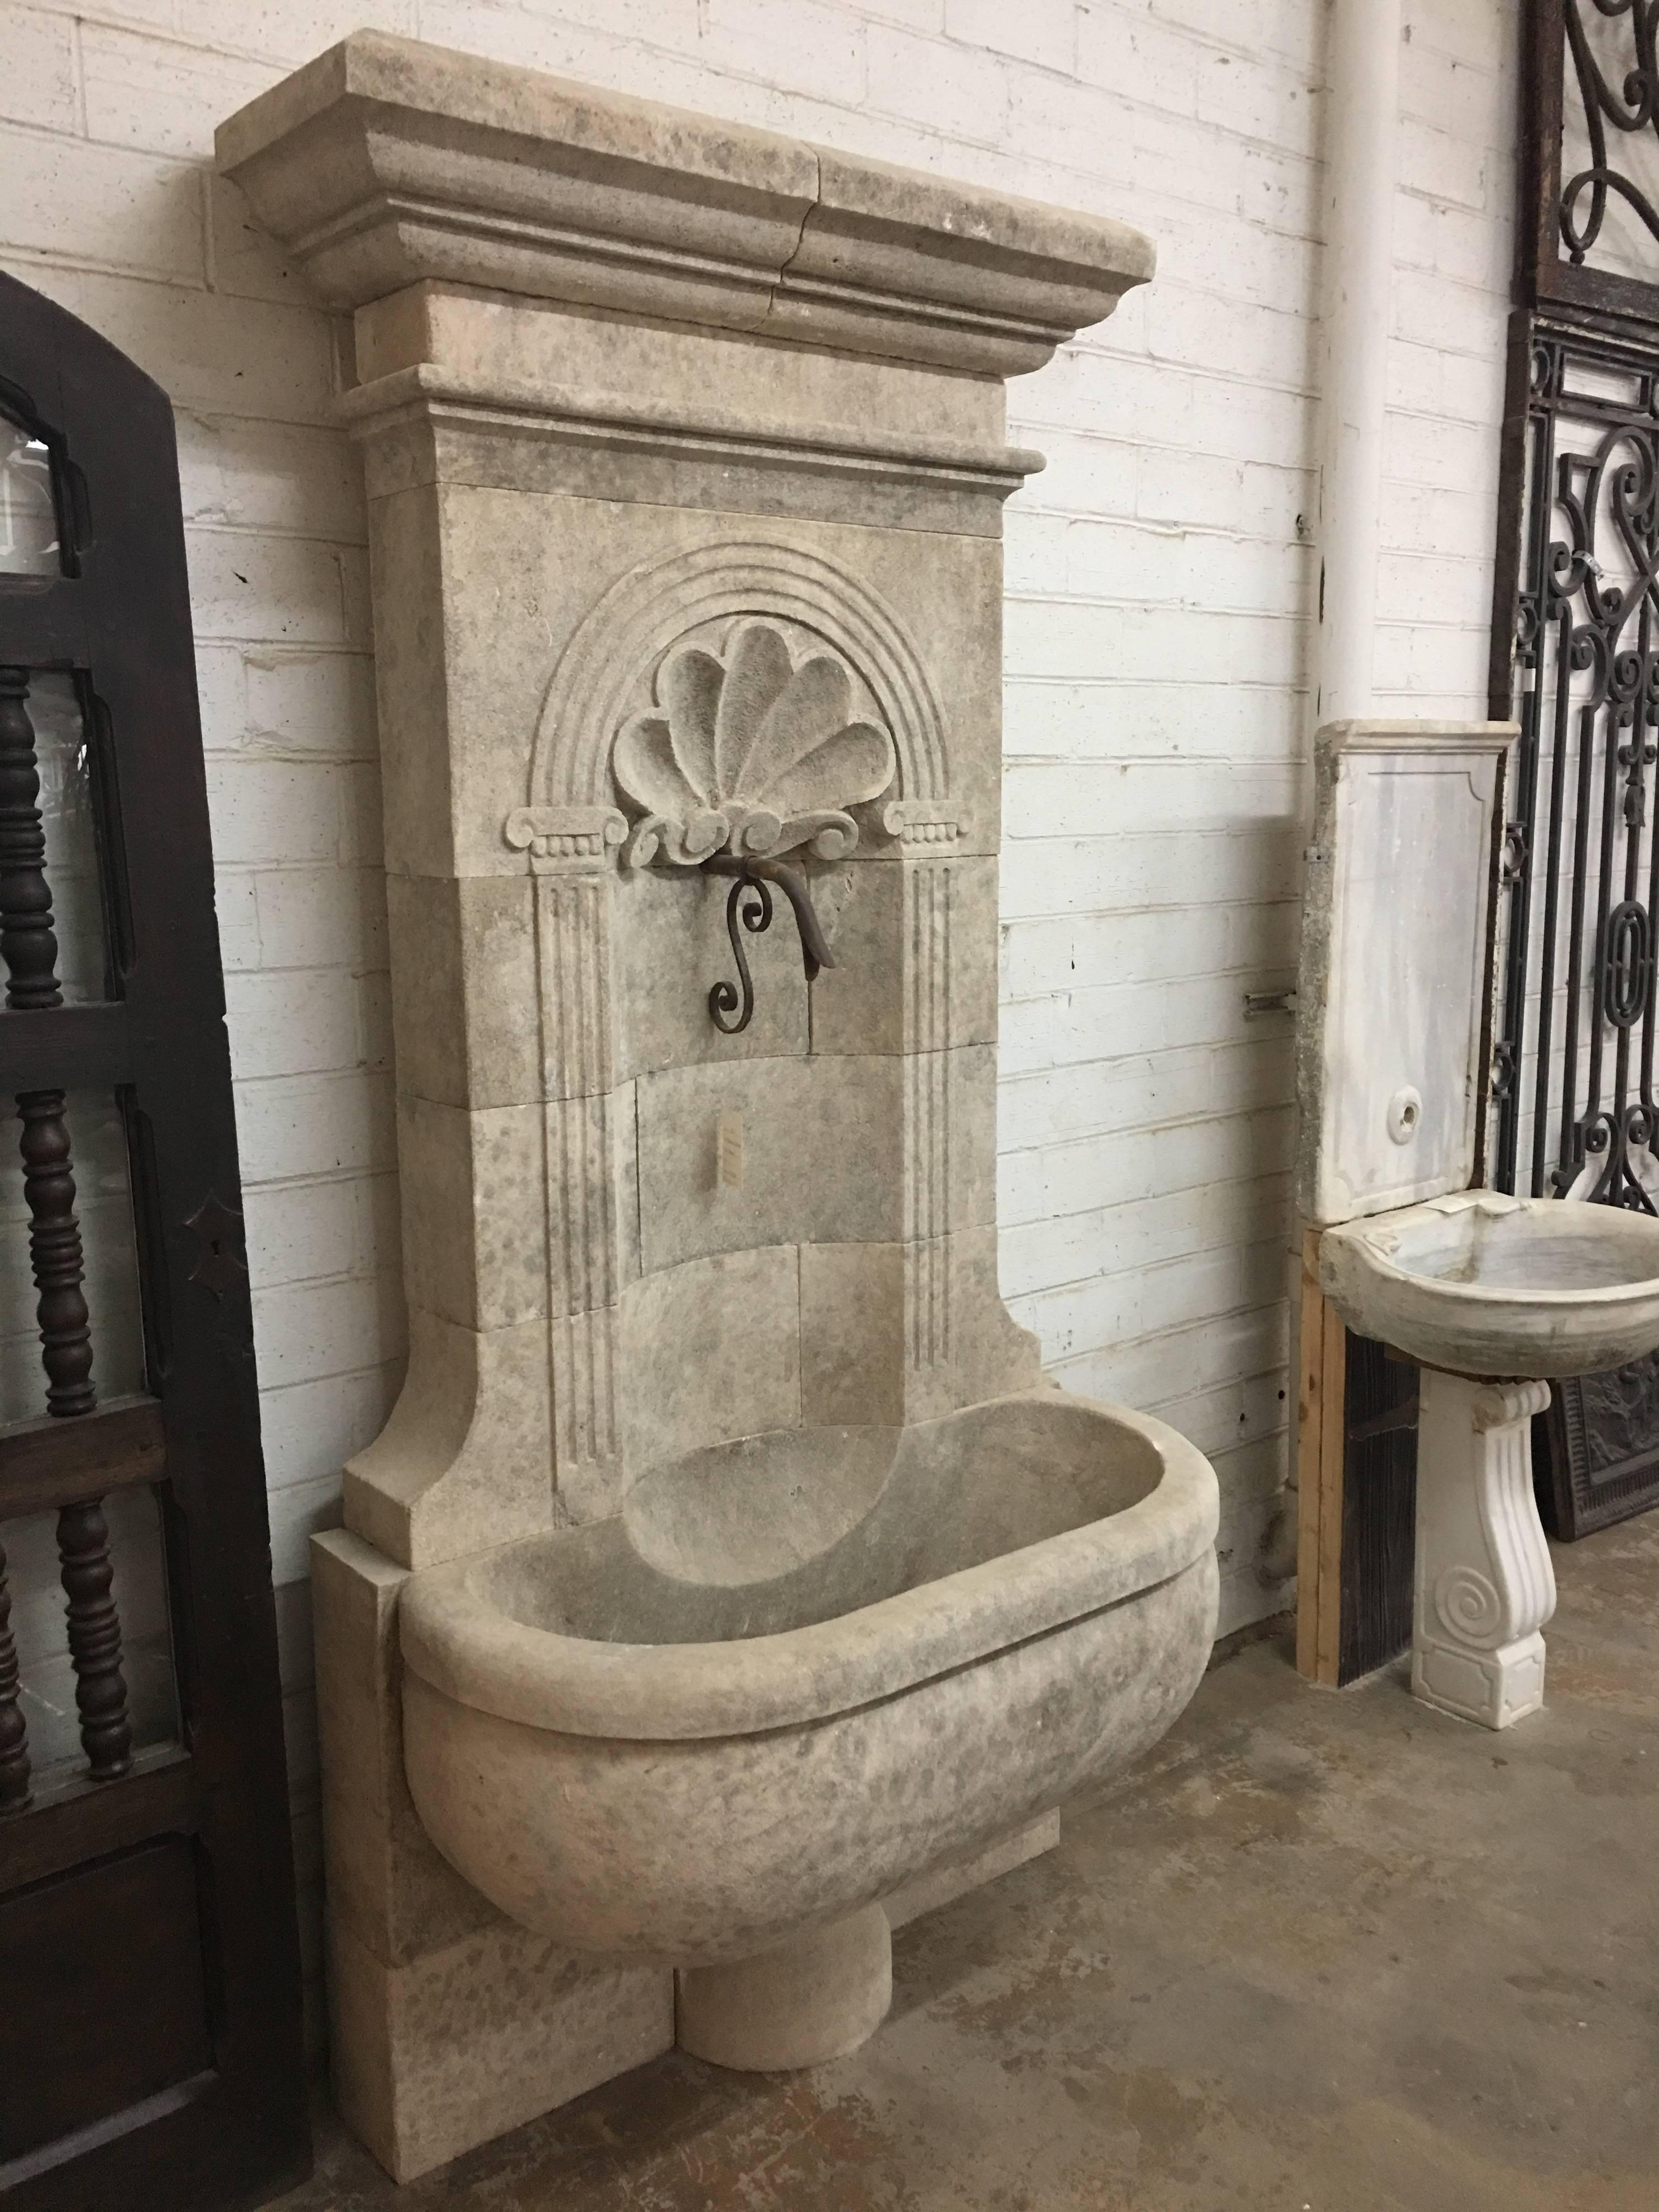 Here we offer a hand carved limestone wall fountain of monumental proportions. The fluted columns and arch over the shell carving and water exit are all Classic French design. The oversized bowl and overhanging crown are two more carved elements